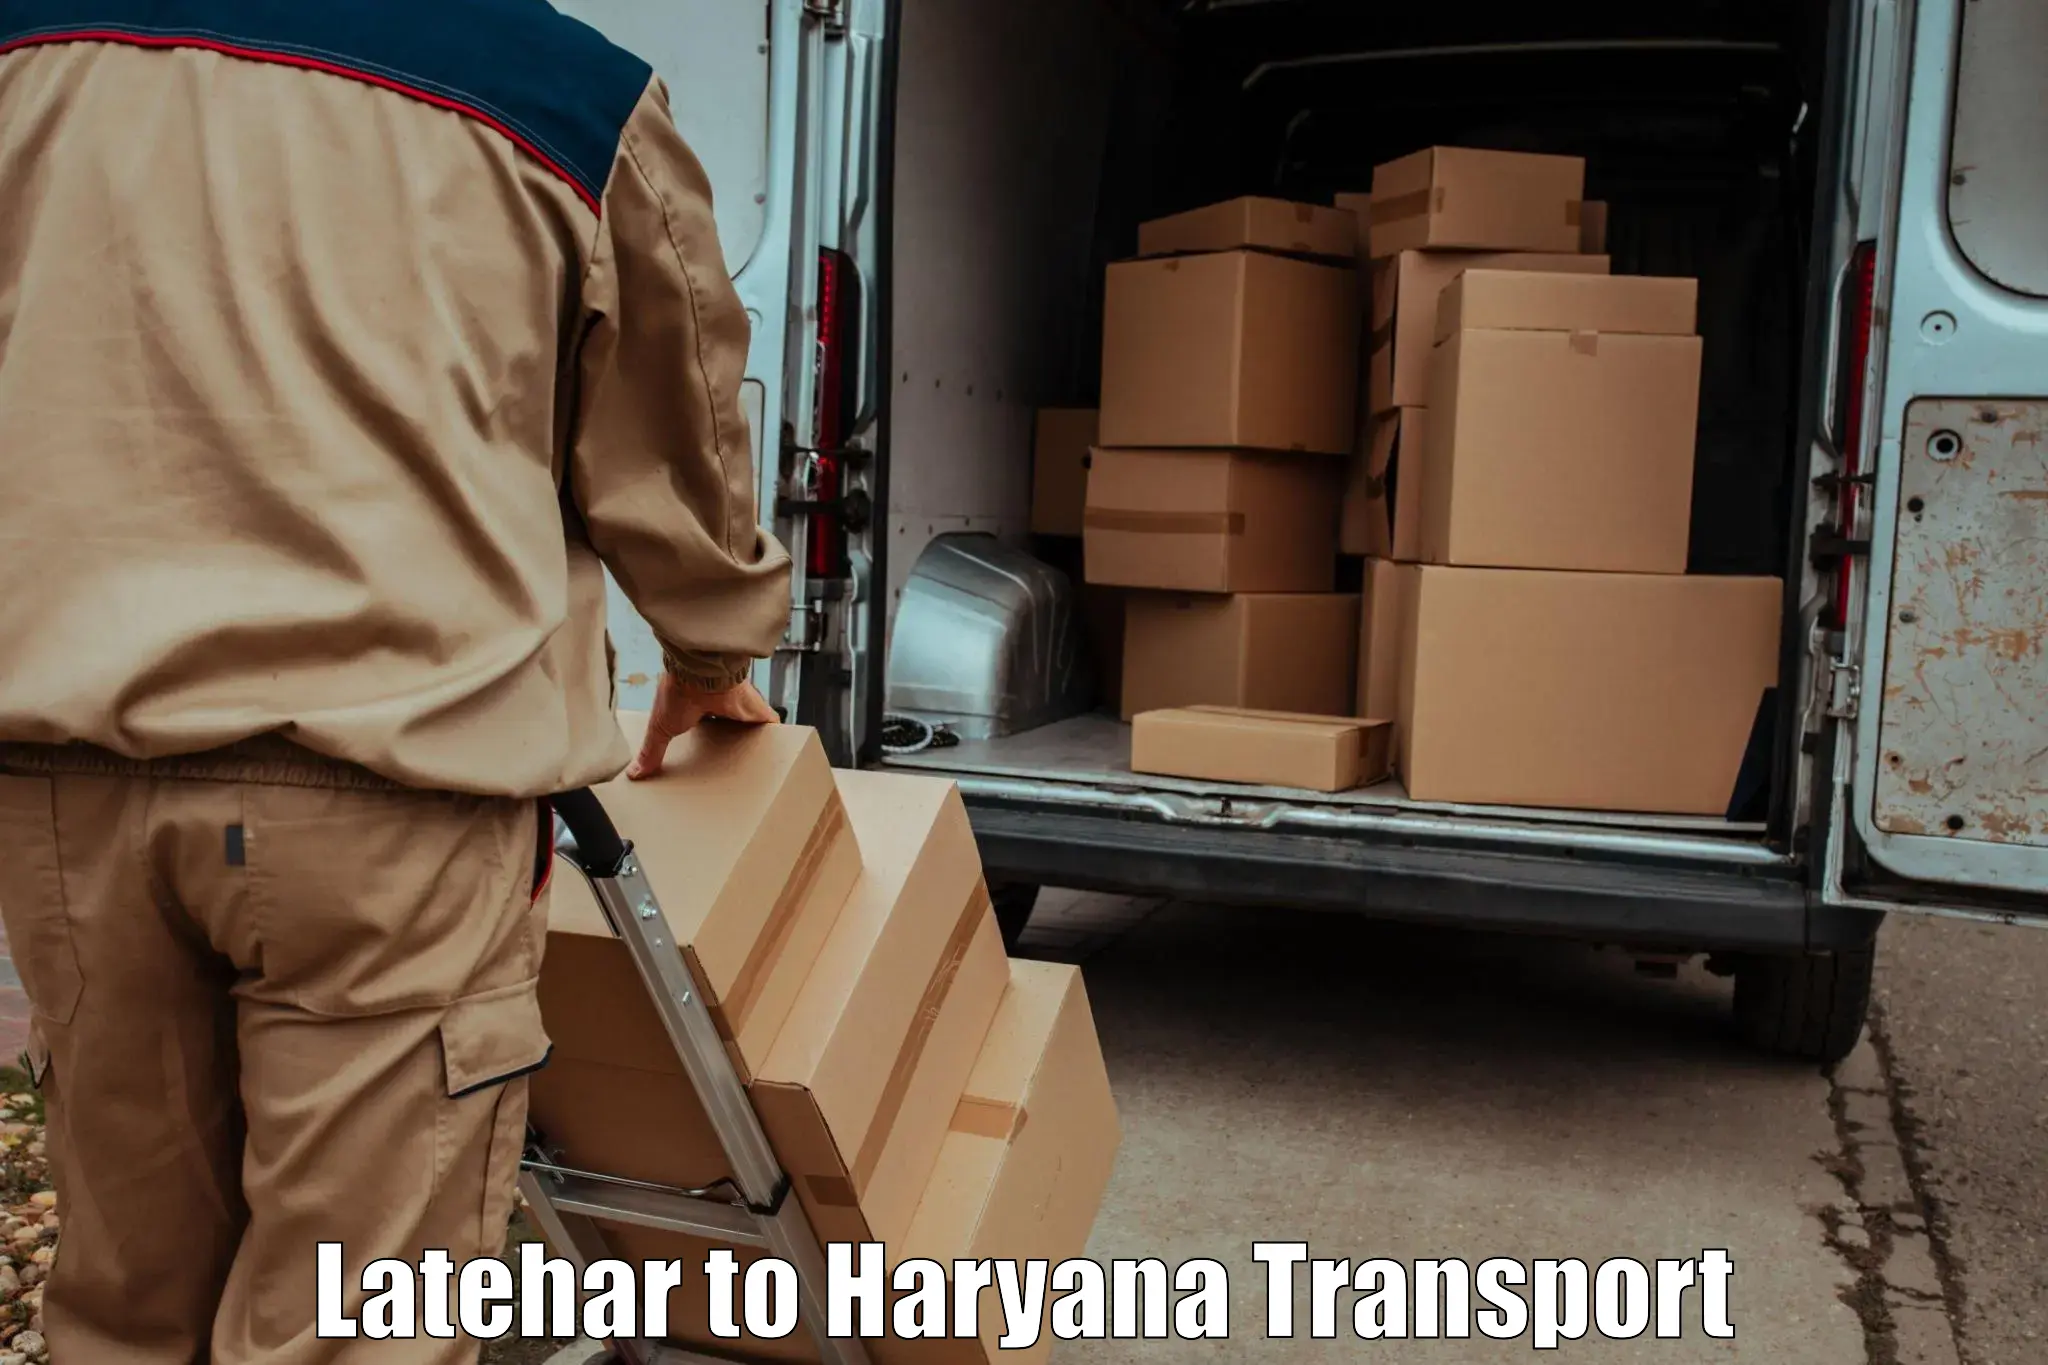 Transport shared services Latehar to Chaudhary Charan Singh Haryana Agricultural University Hisar